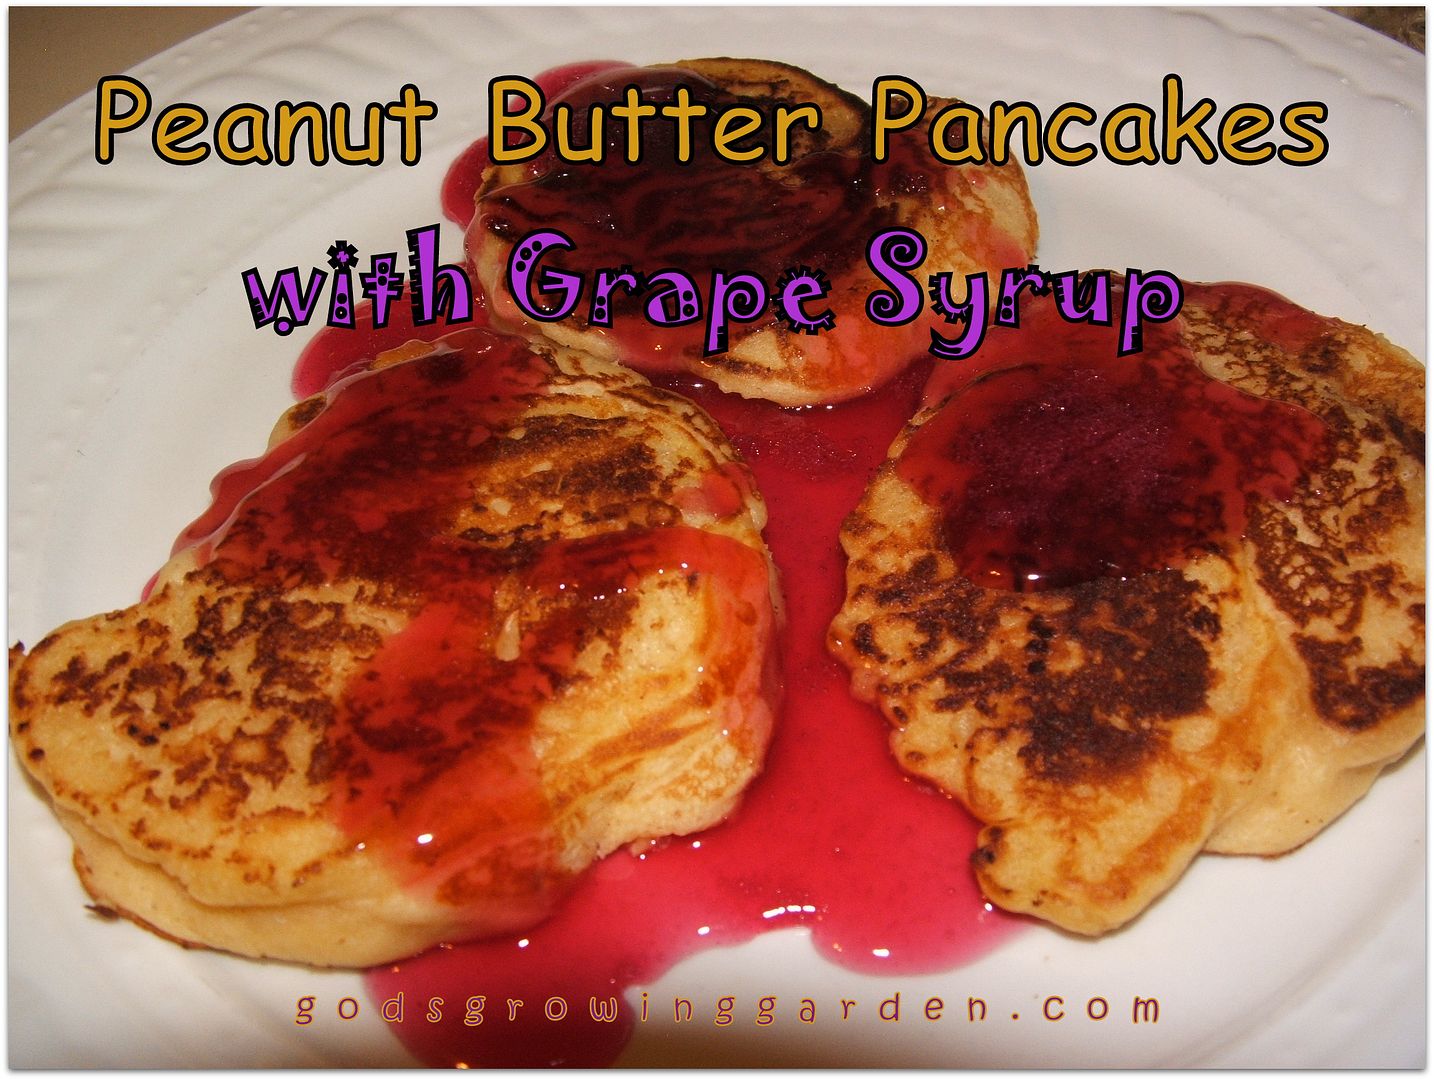 Peanut Butter Pancakes with Grape Syrup by Angie Ouellette-Tower photo 011_zps5f3425ec.jpg